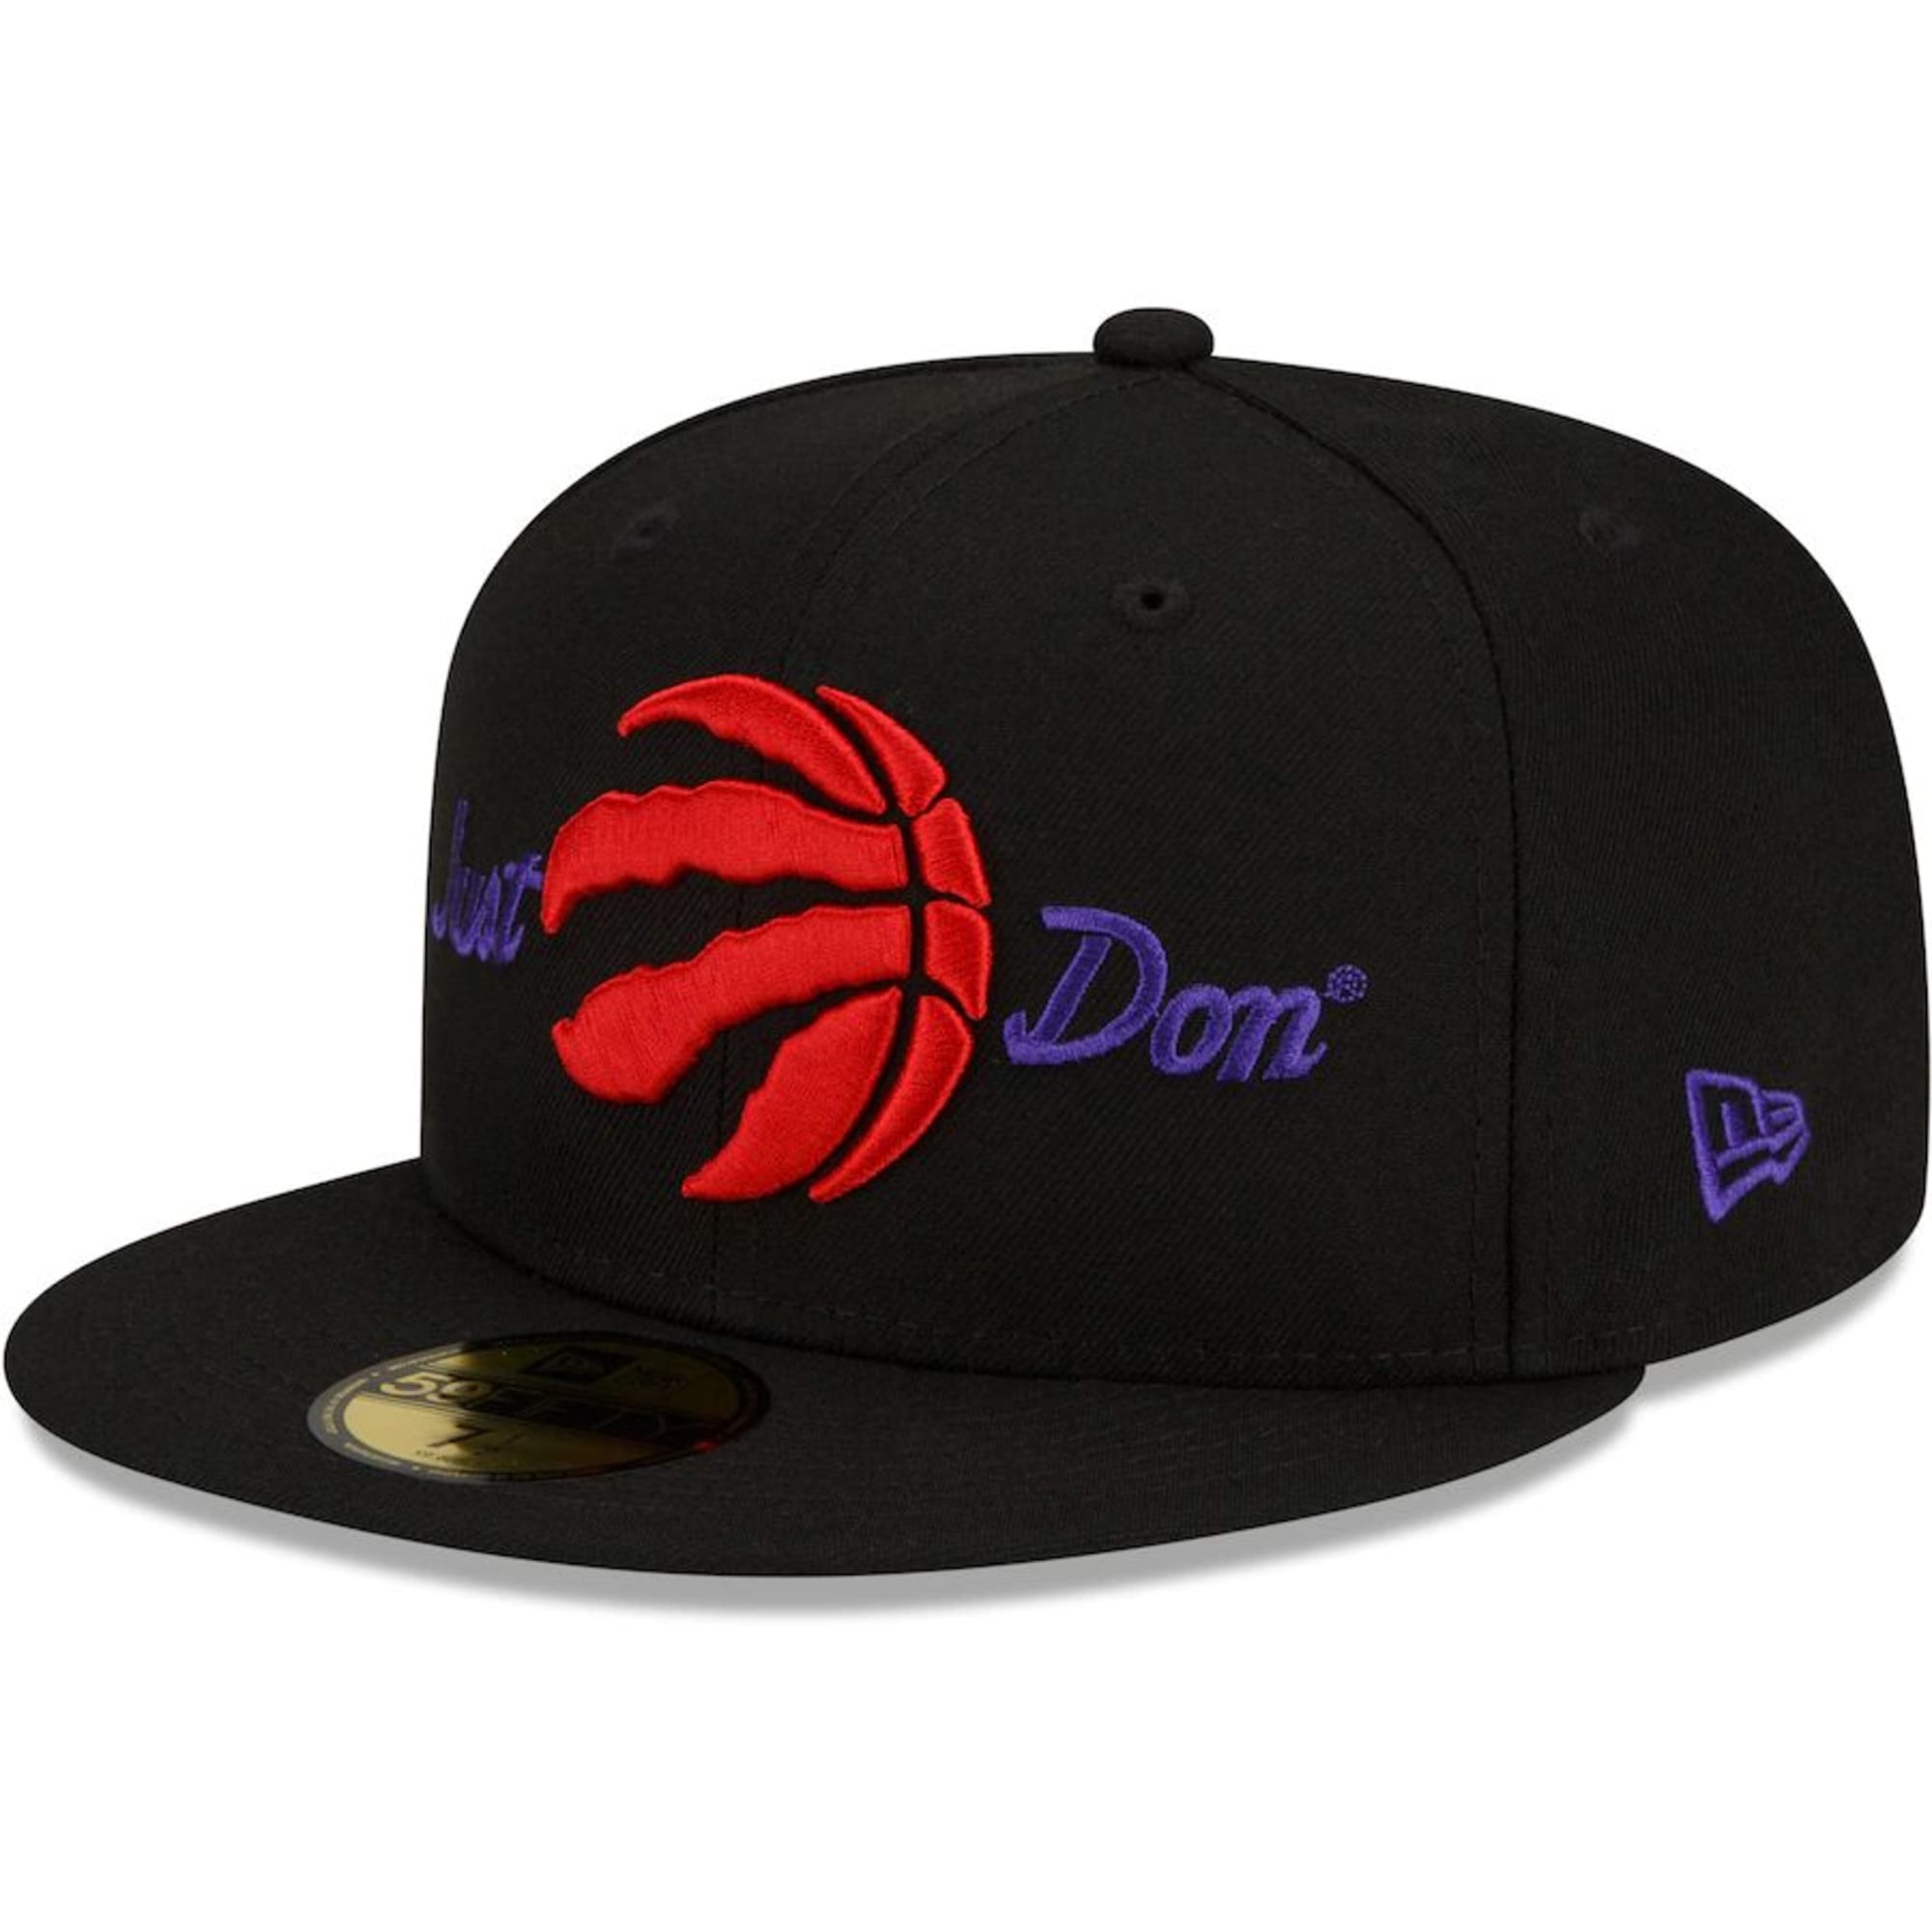 The New Era x Just Don Toronto Raptors hat collab is here